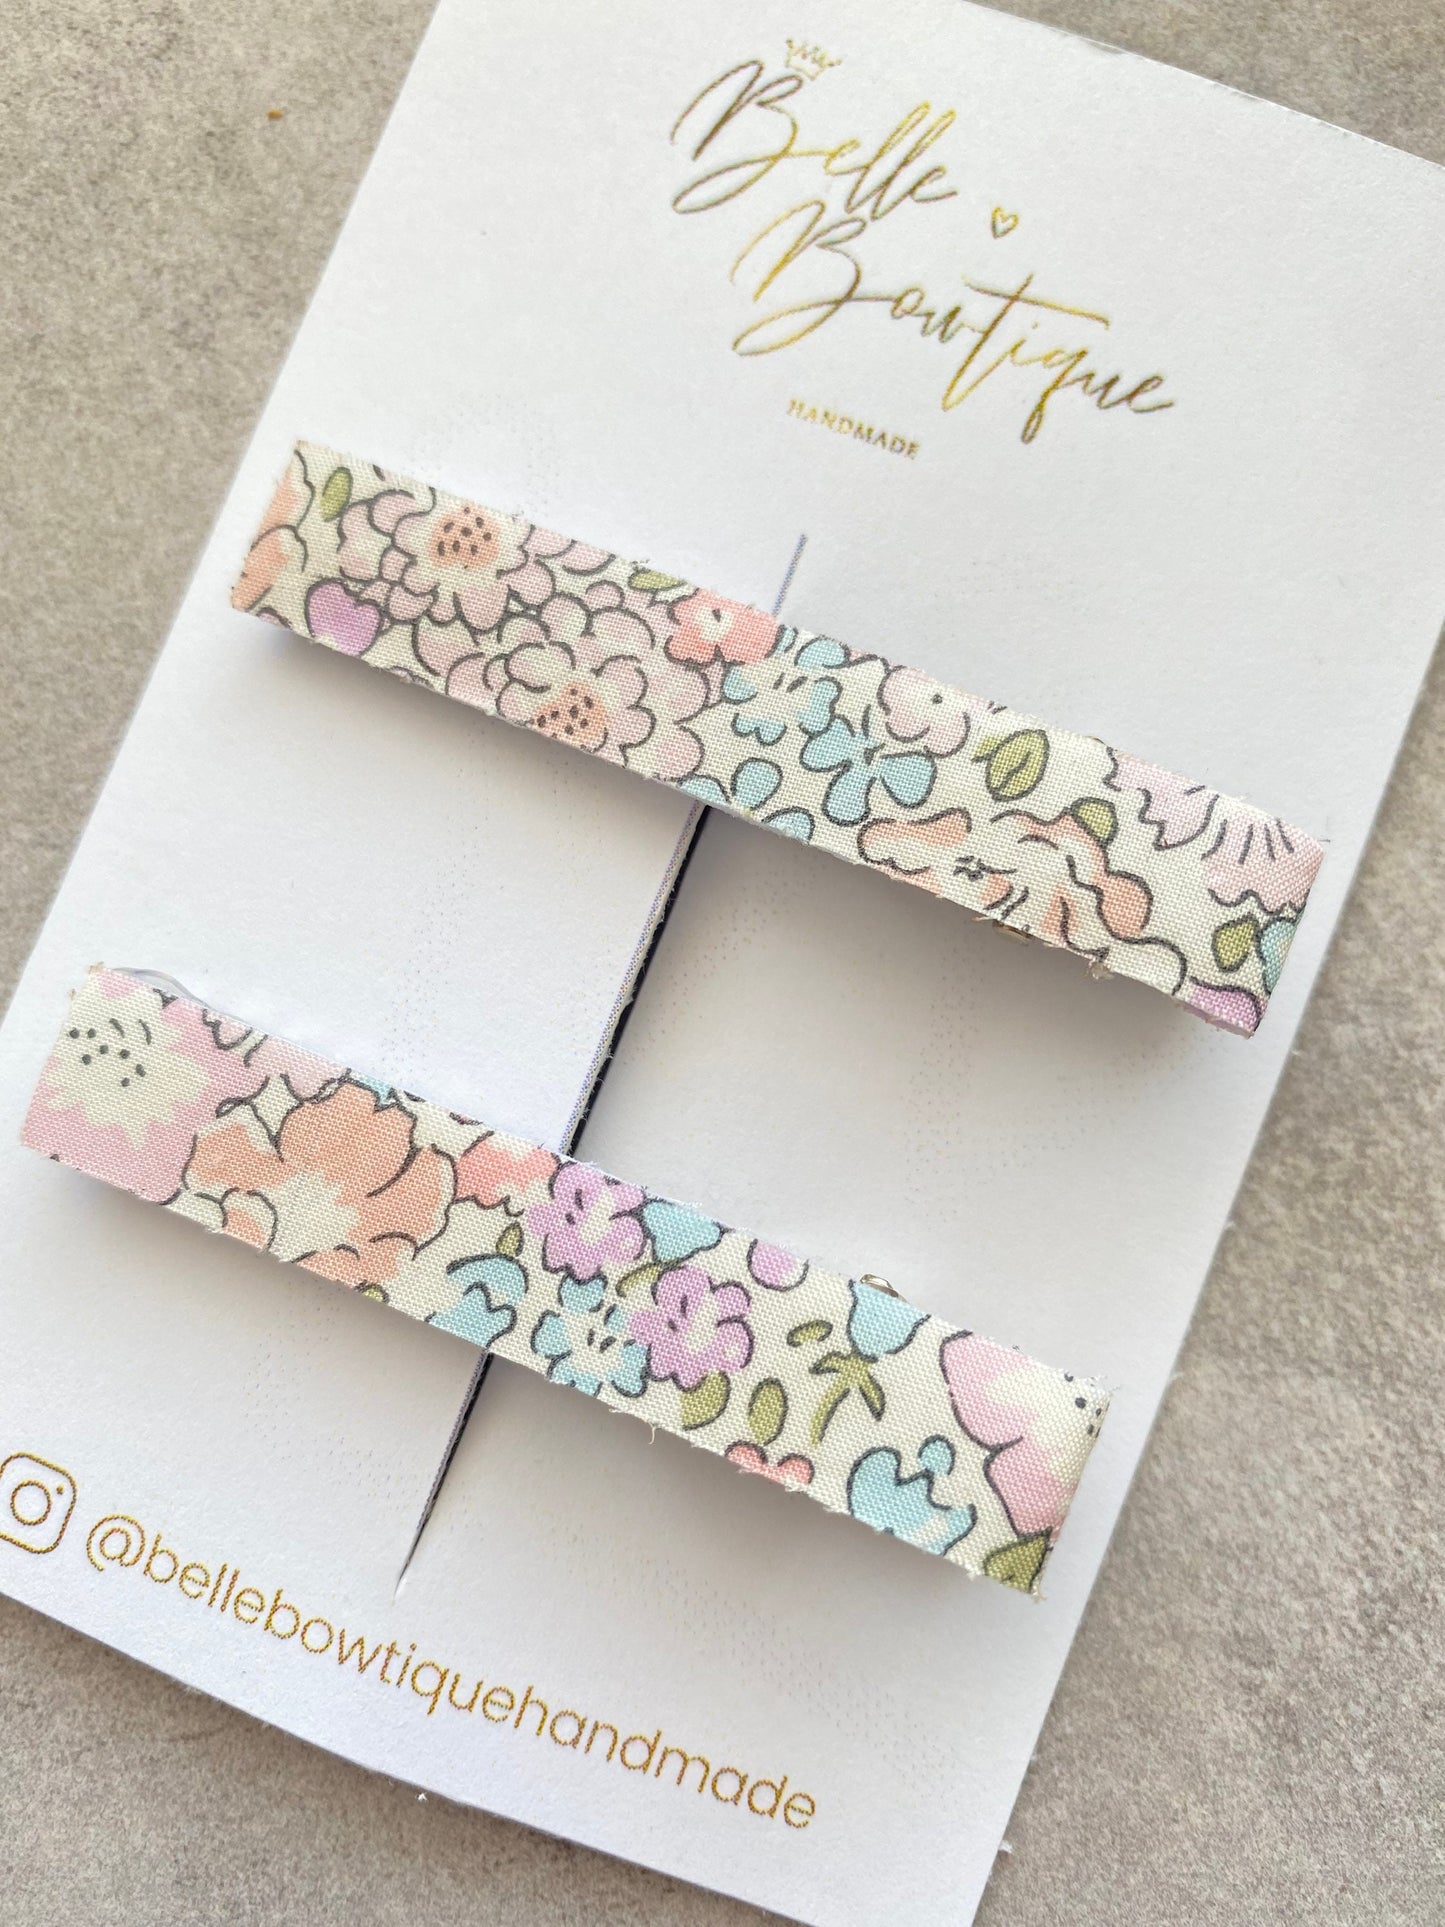 Girls Hair Clip Barrette Pair Fringe Clips Floral Flower Liberty London Fabric Clip Liberty Fabric Michelle E Pink